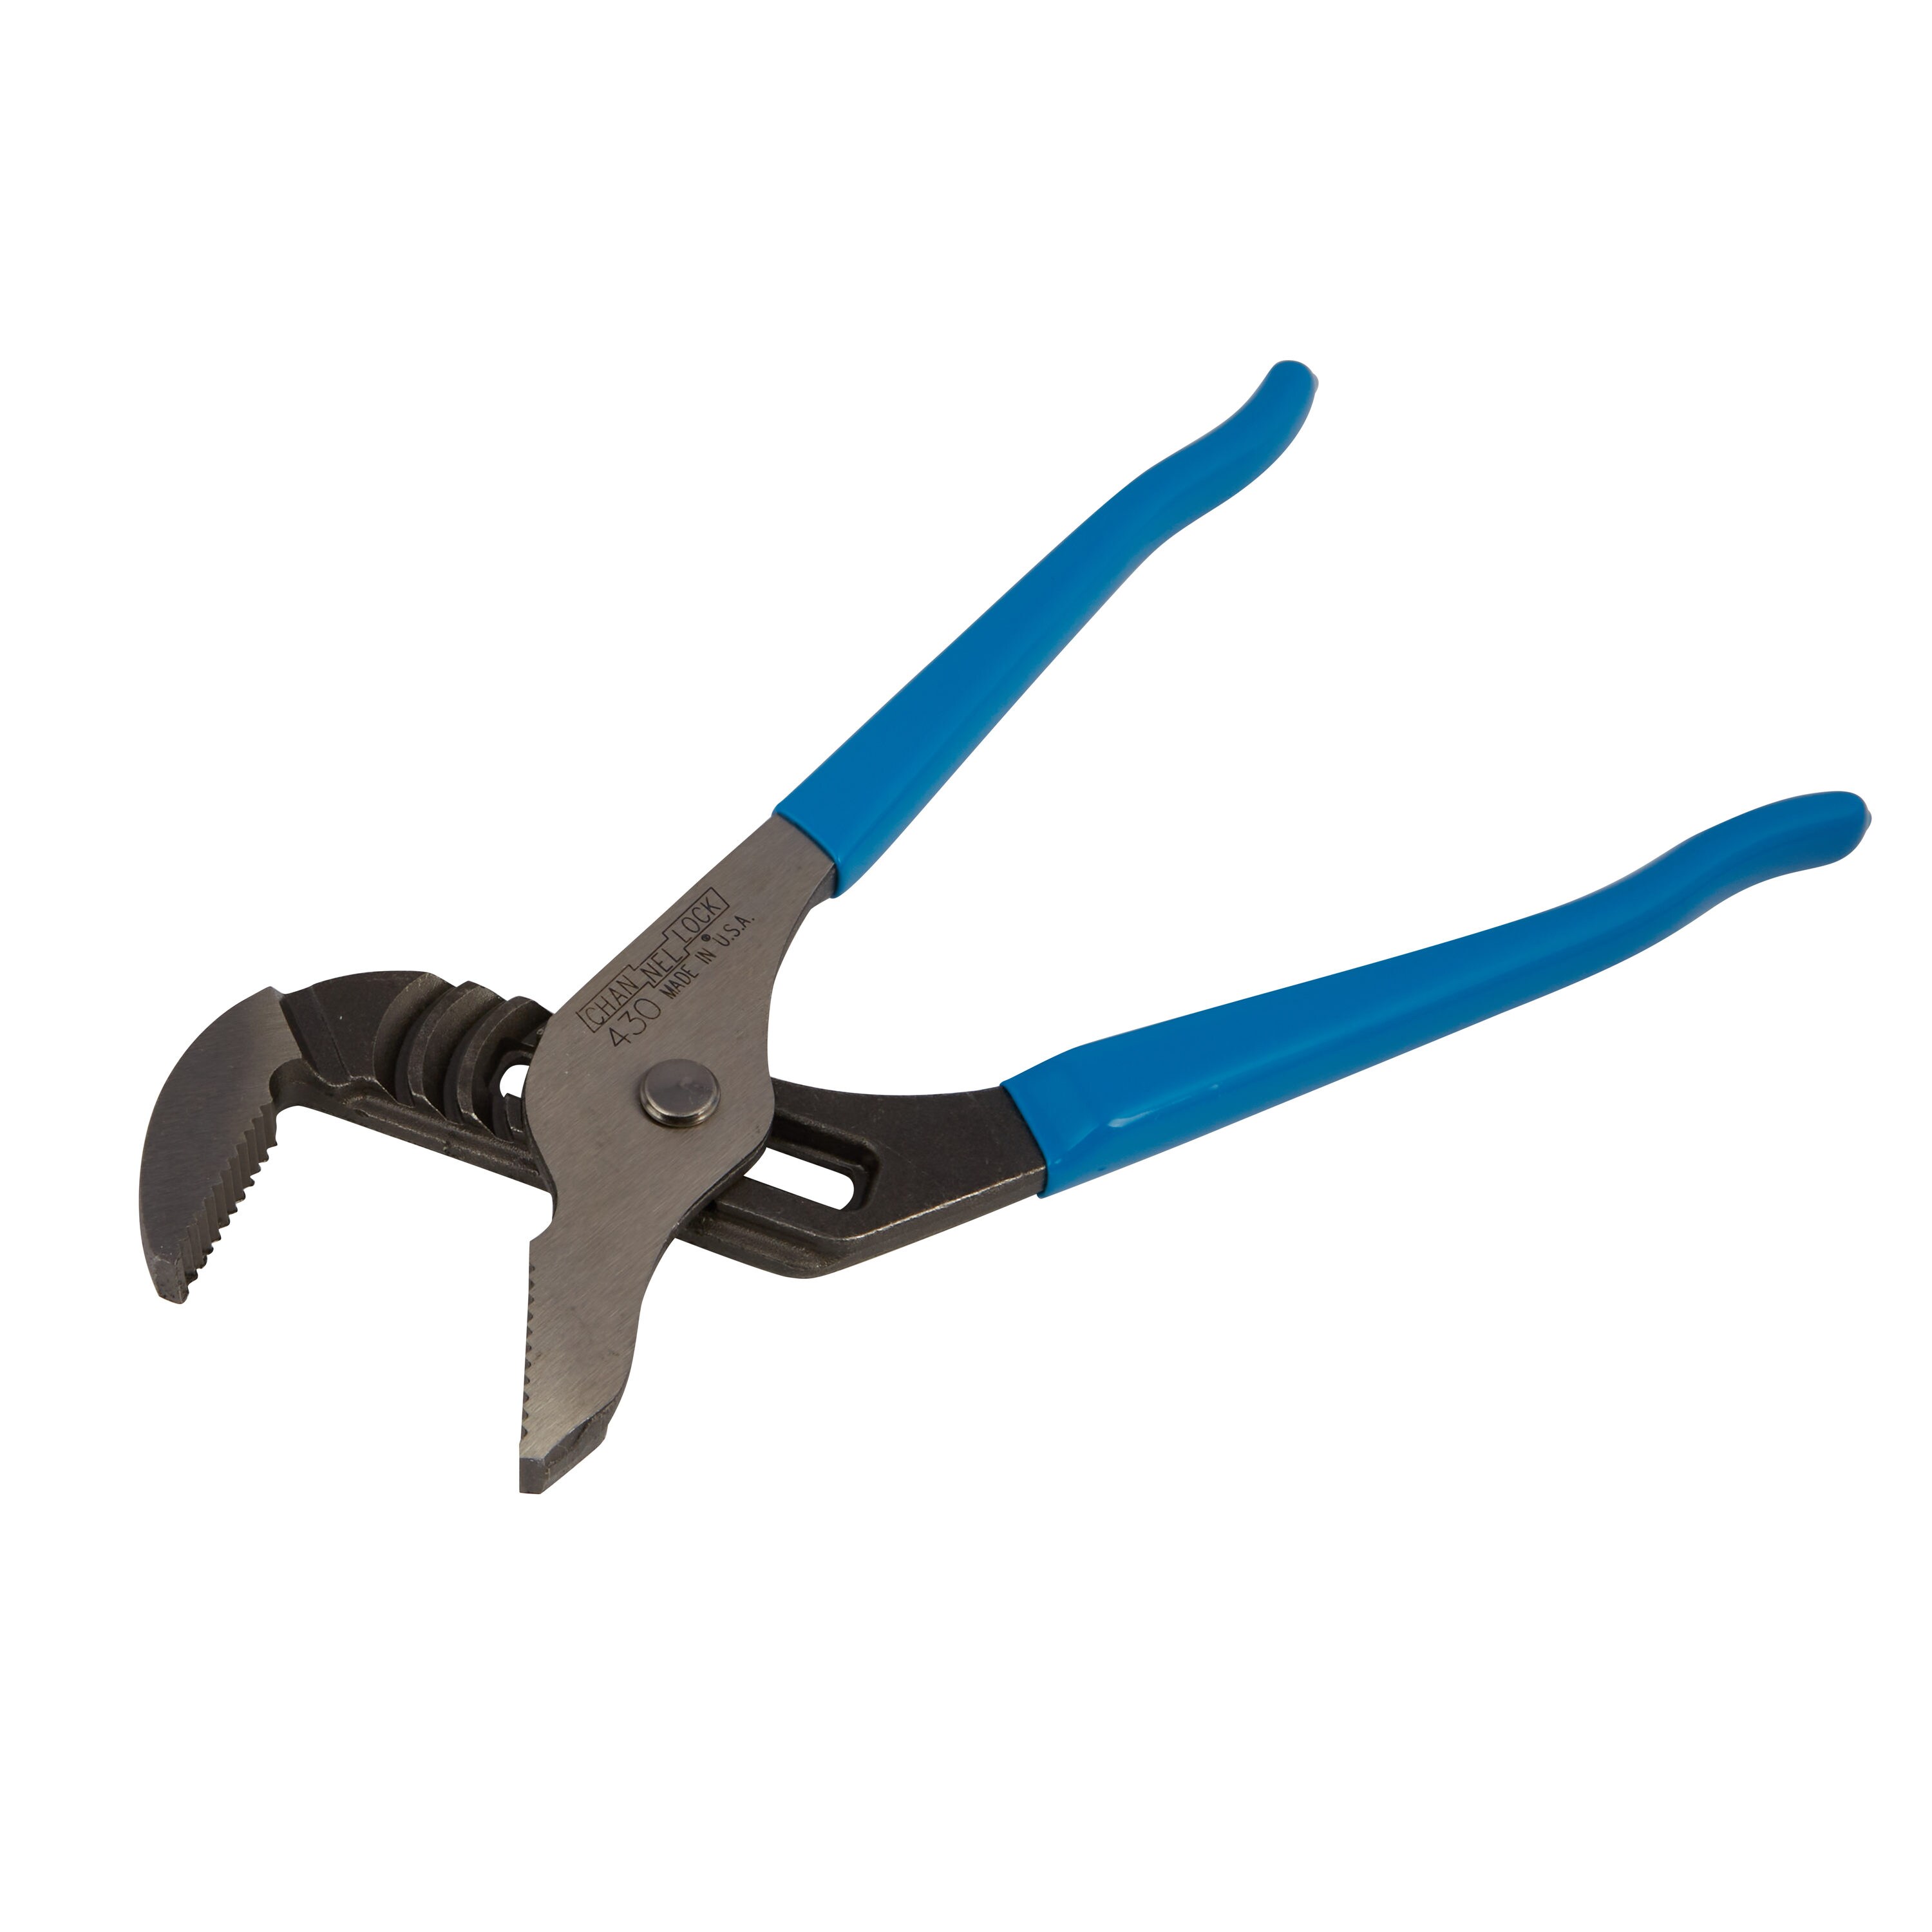 CHANNELLOCK  430  10" Tongue and Groove Plier Groove Joint Pliers pipe plumbing 